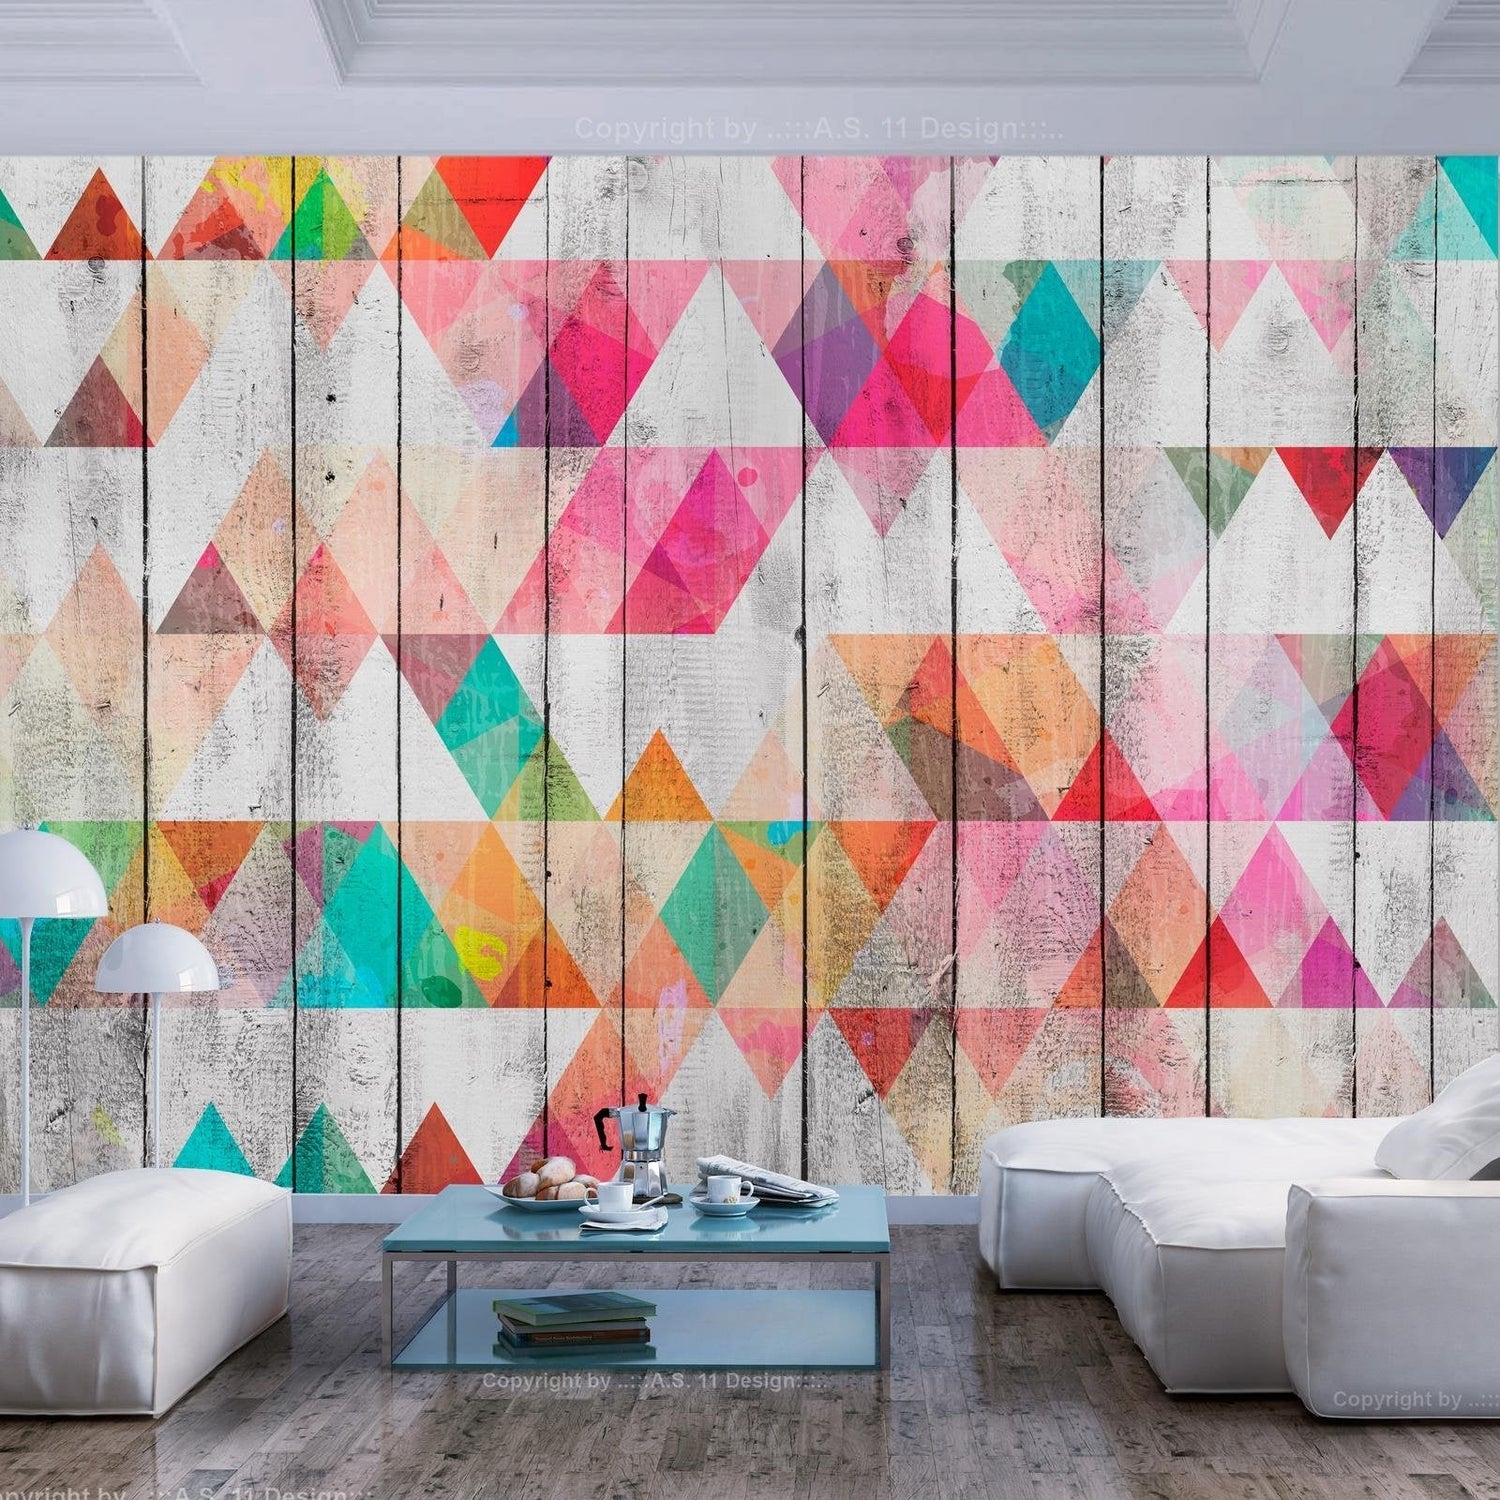 Peel and stick wall mural - Rainbow Triangles-TipTopHomeDecor